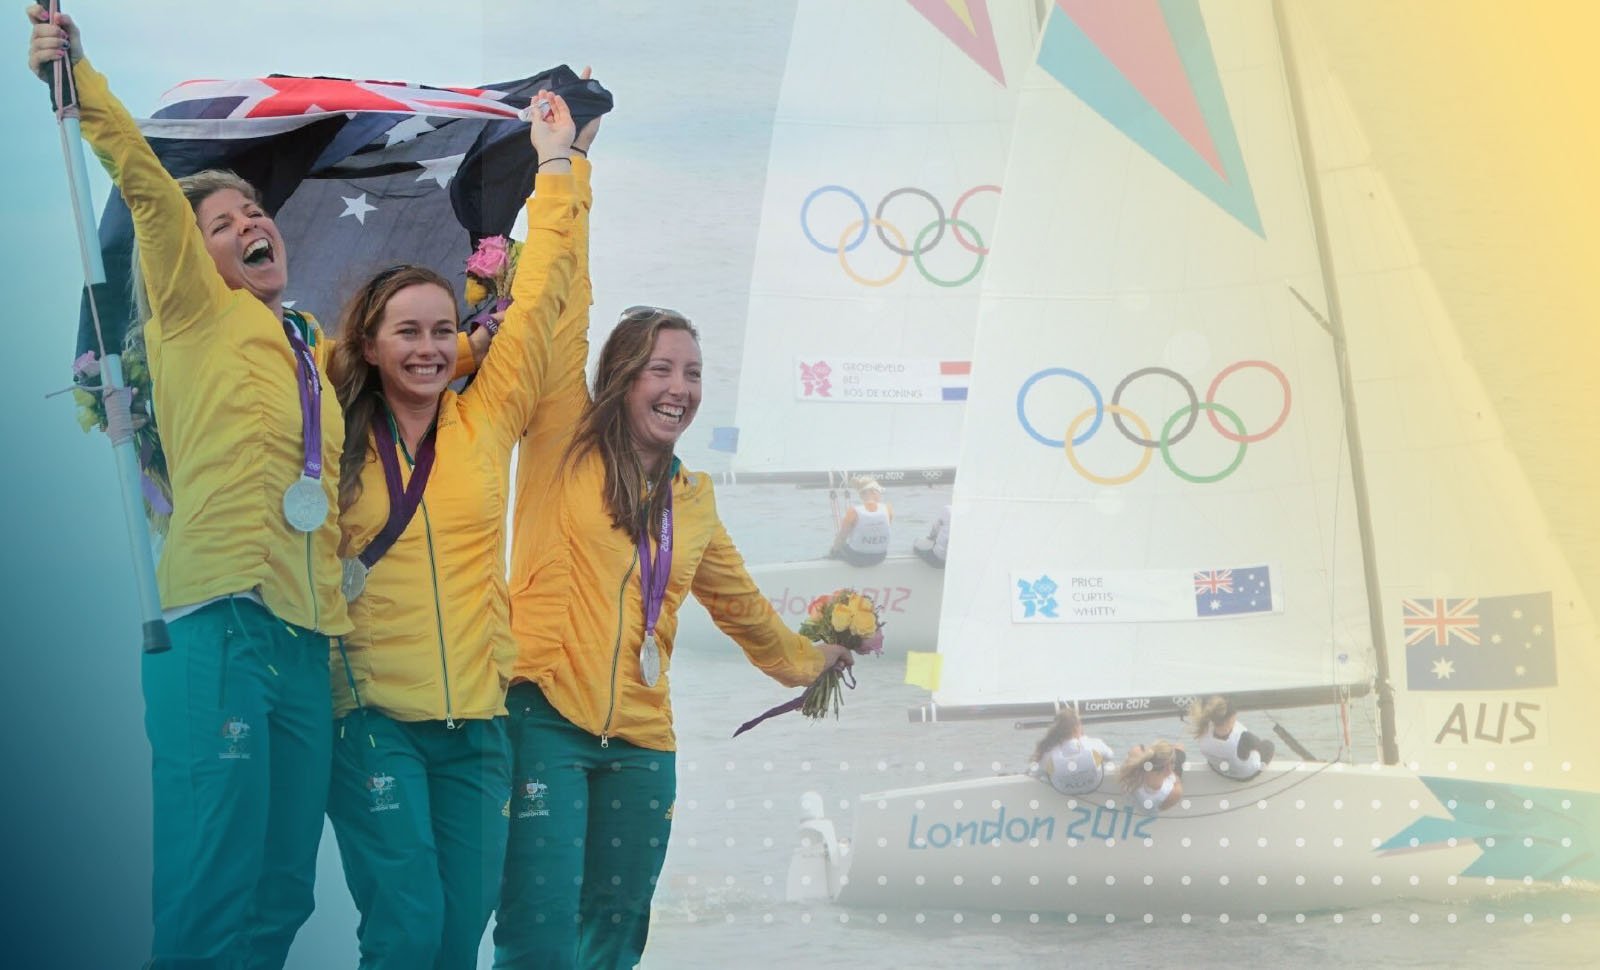 Three women dressed in matching yellow and teal outfits hold the Australian flag in front of sailboats with the Olympic rings on the sails